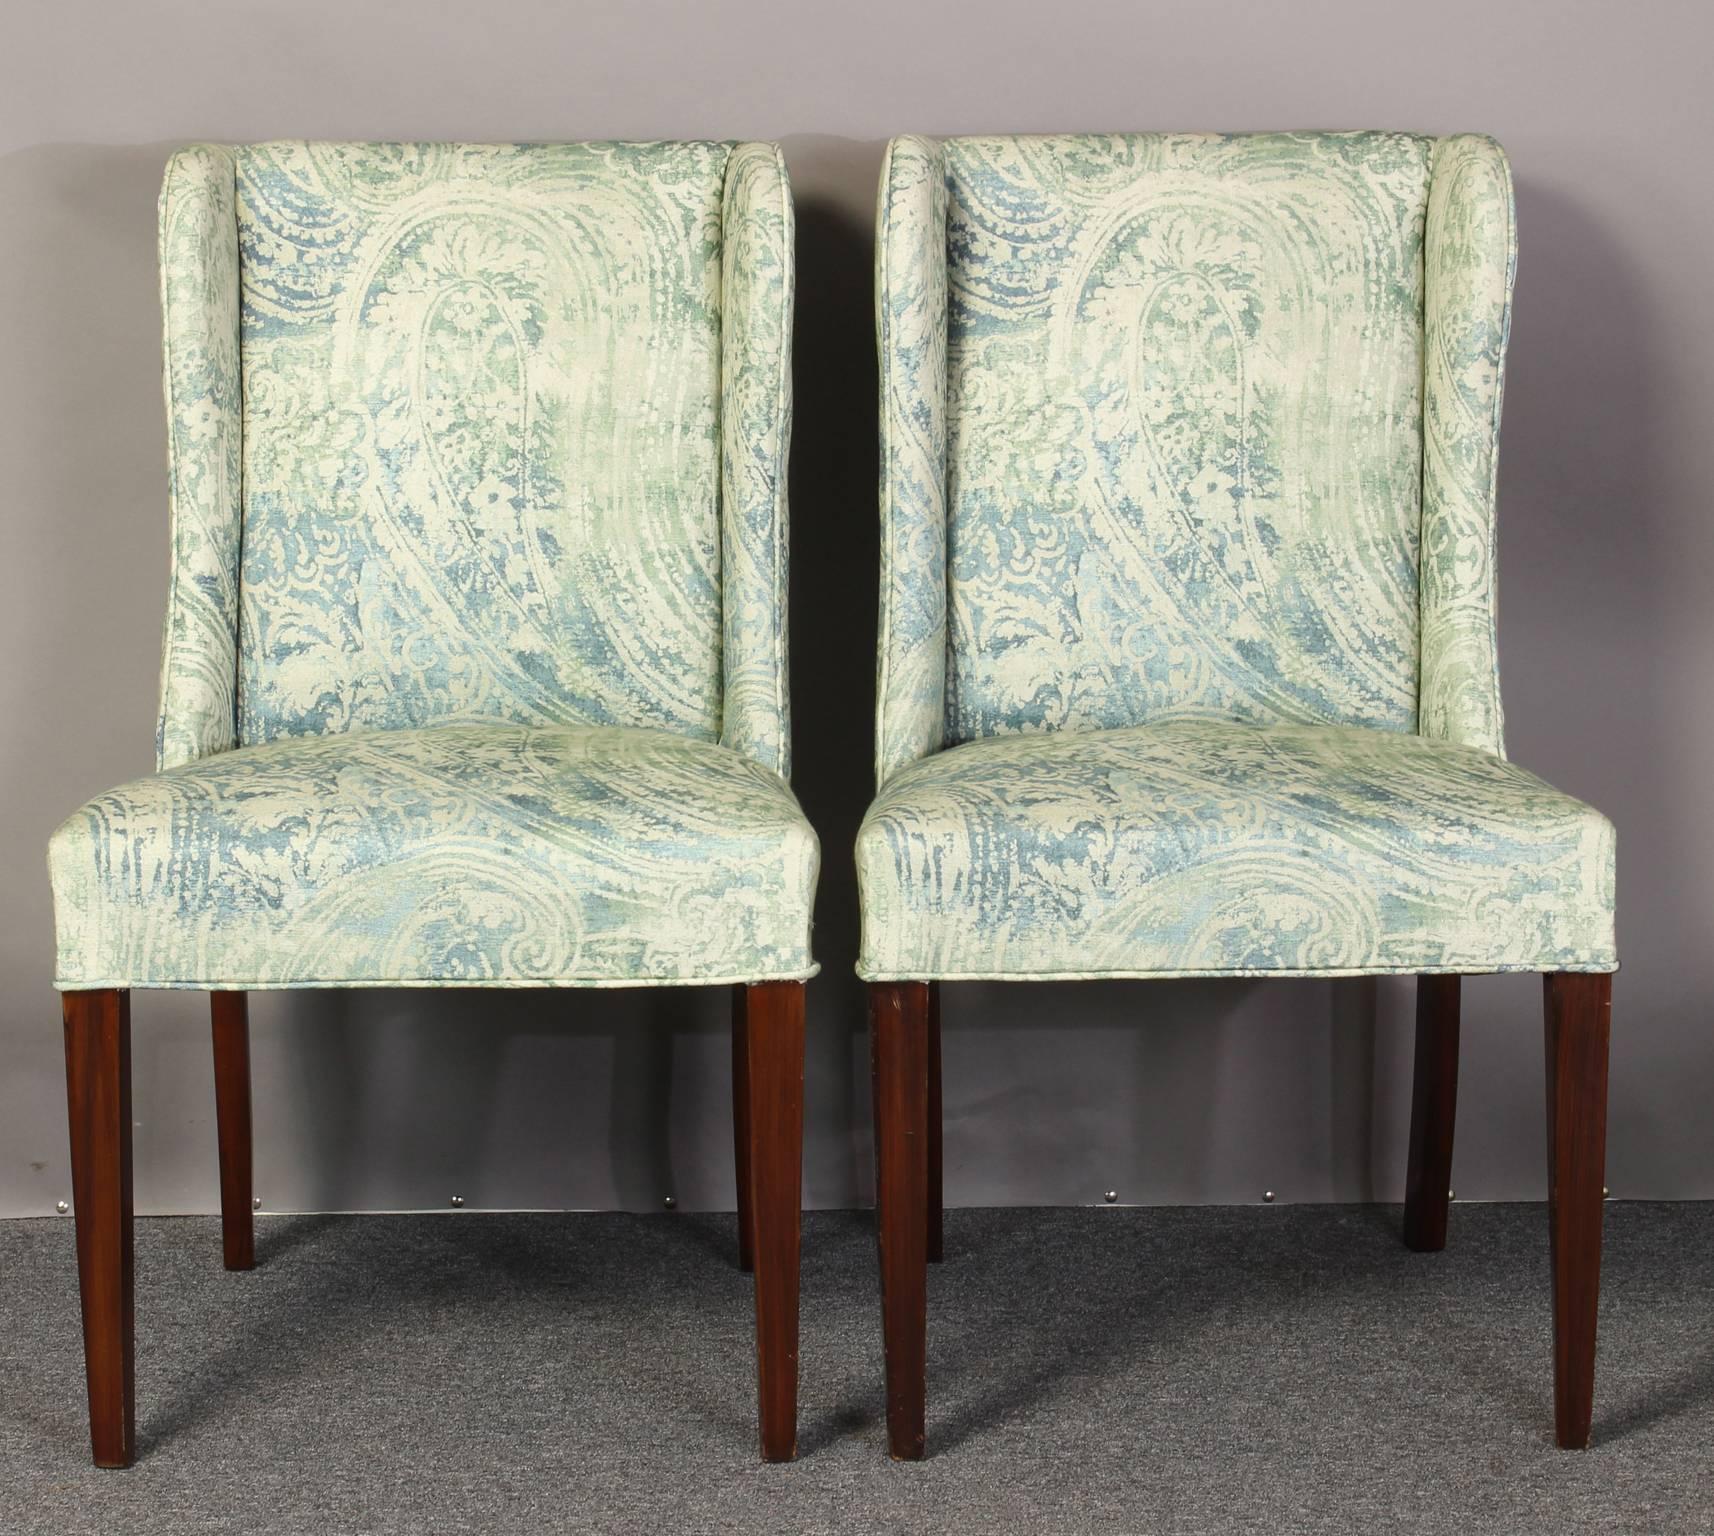 Set of Four Upholstered Dining Chairs In Excellent Condition For Sale In Kilmarnock, VA